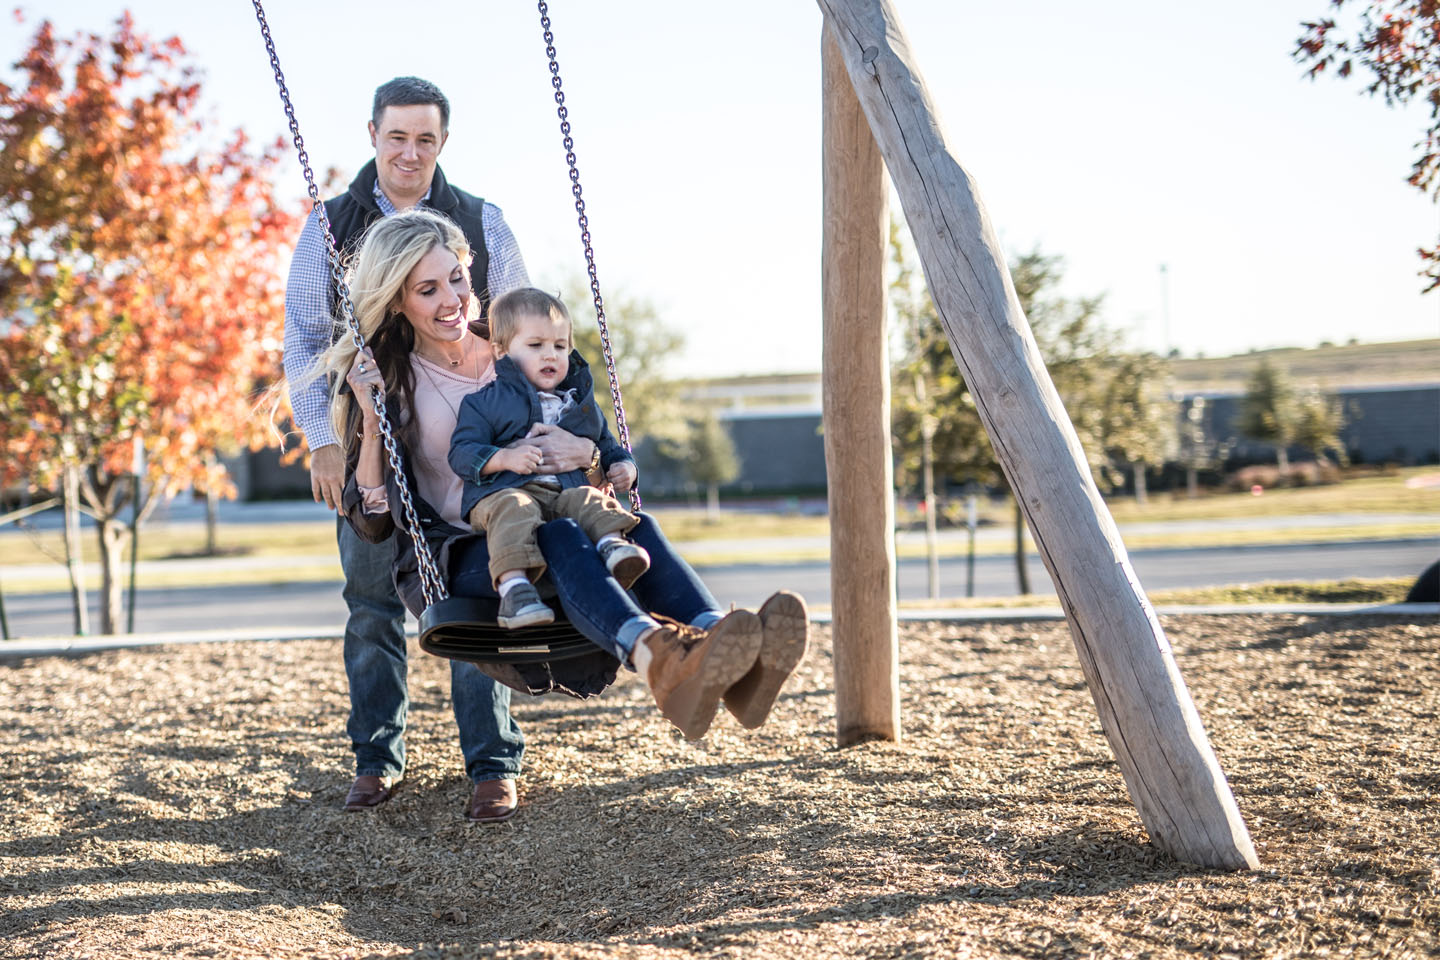 The Mordecai family swings together at Crescent Park